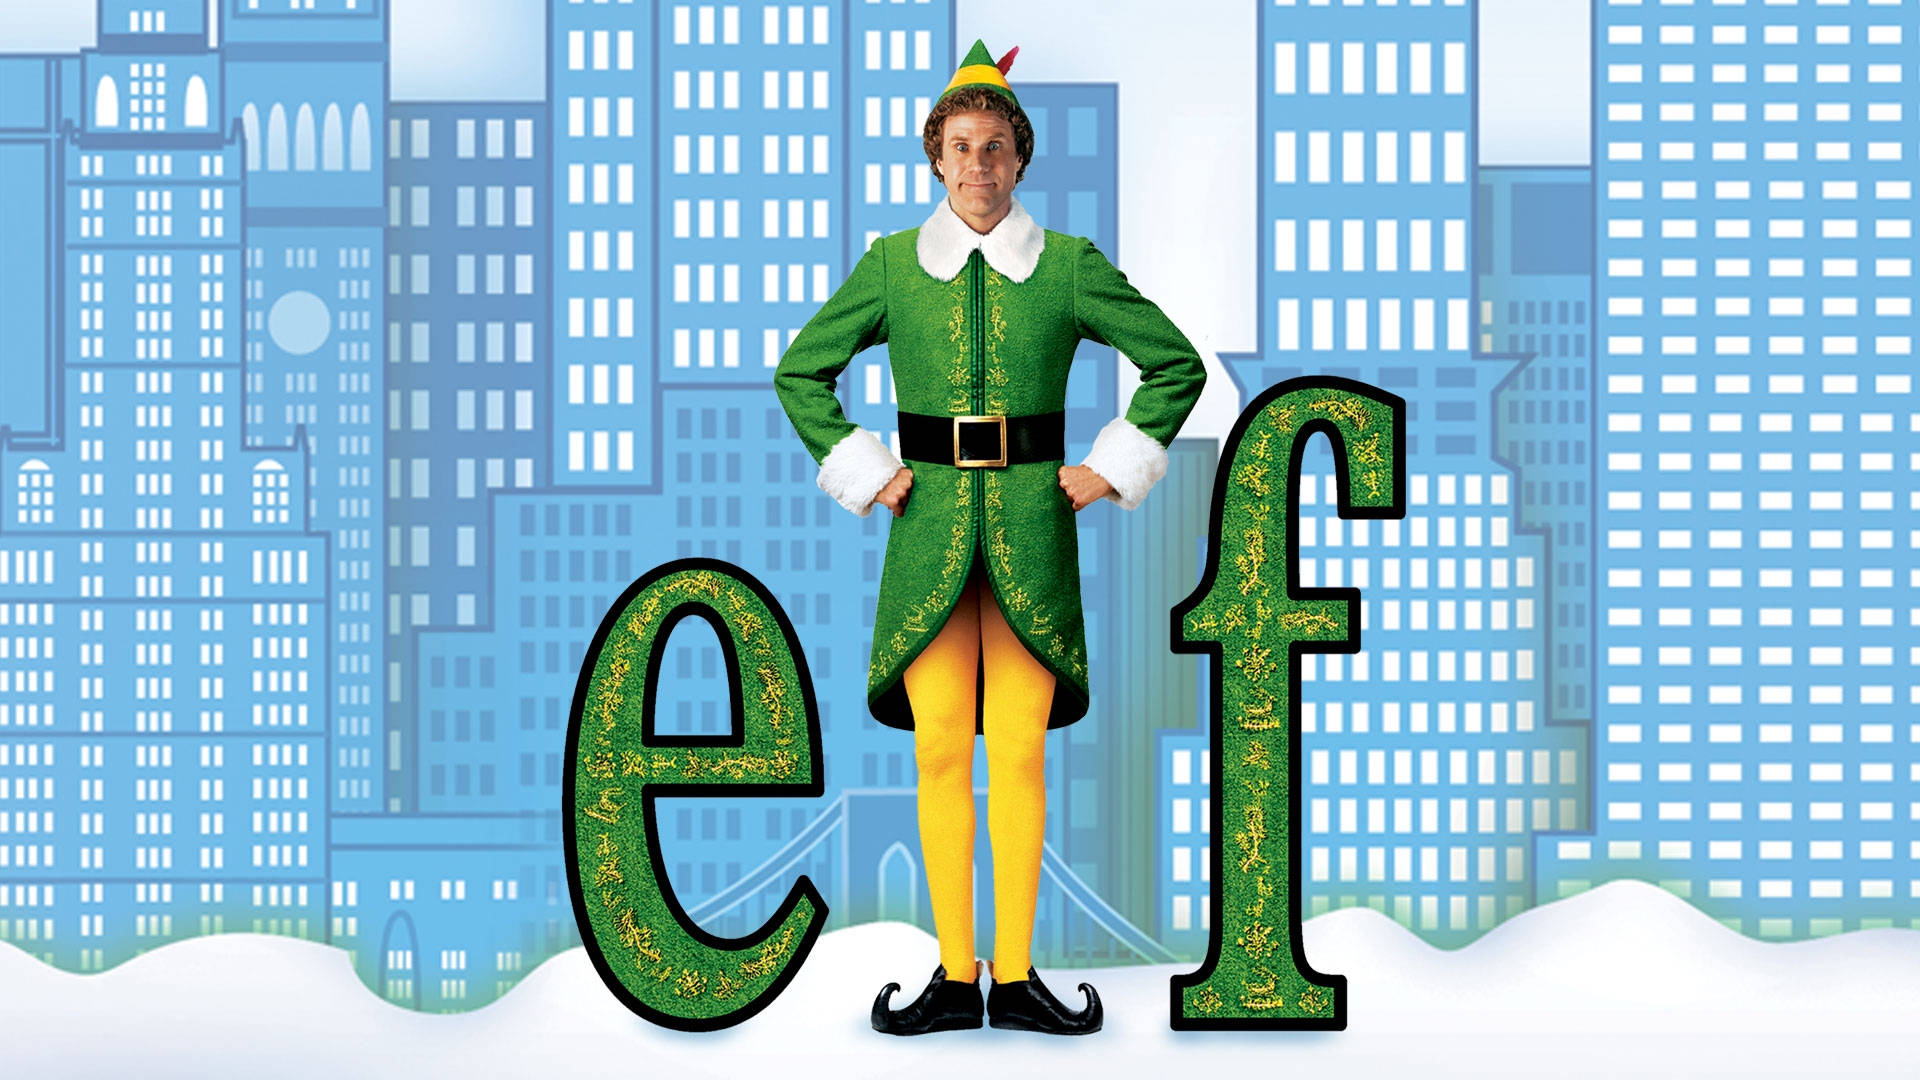 Elf Movie Wallpapers  Top Free Elf Movie Backgrounds  WallpaperAccess